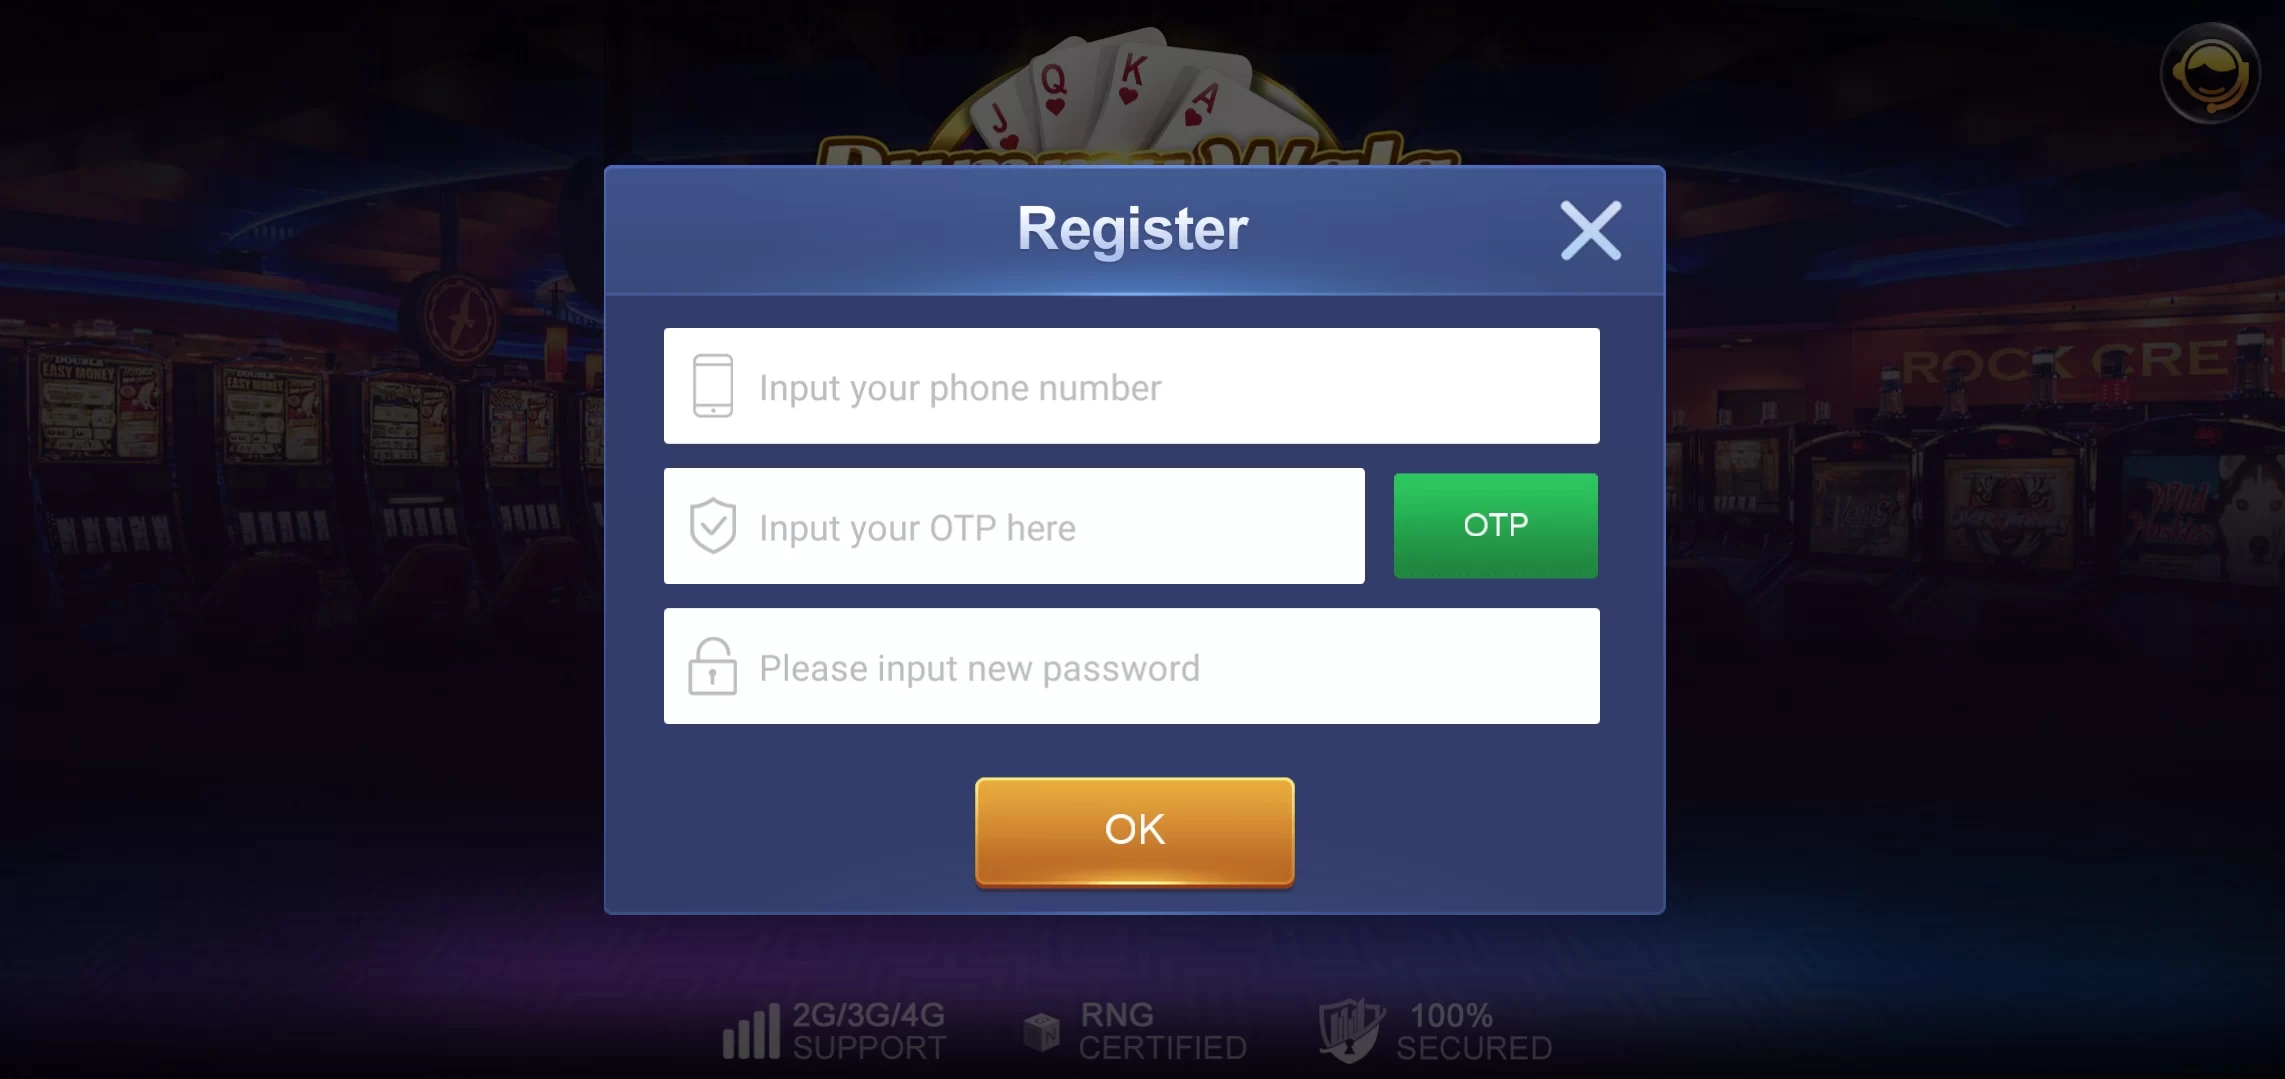 How To Register On Rummy Wala